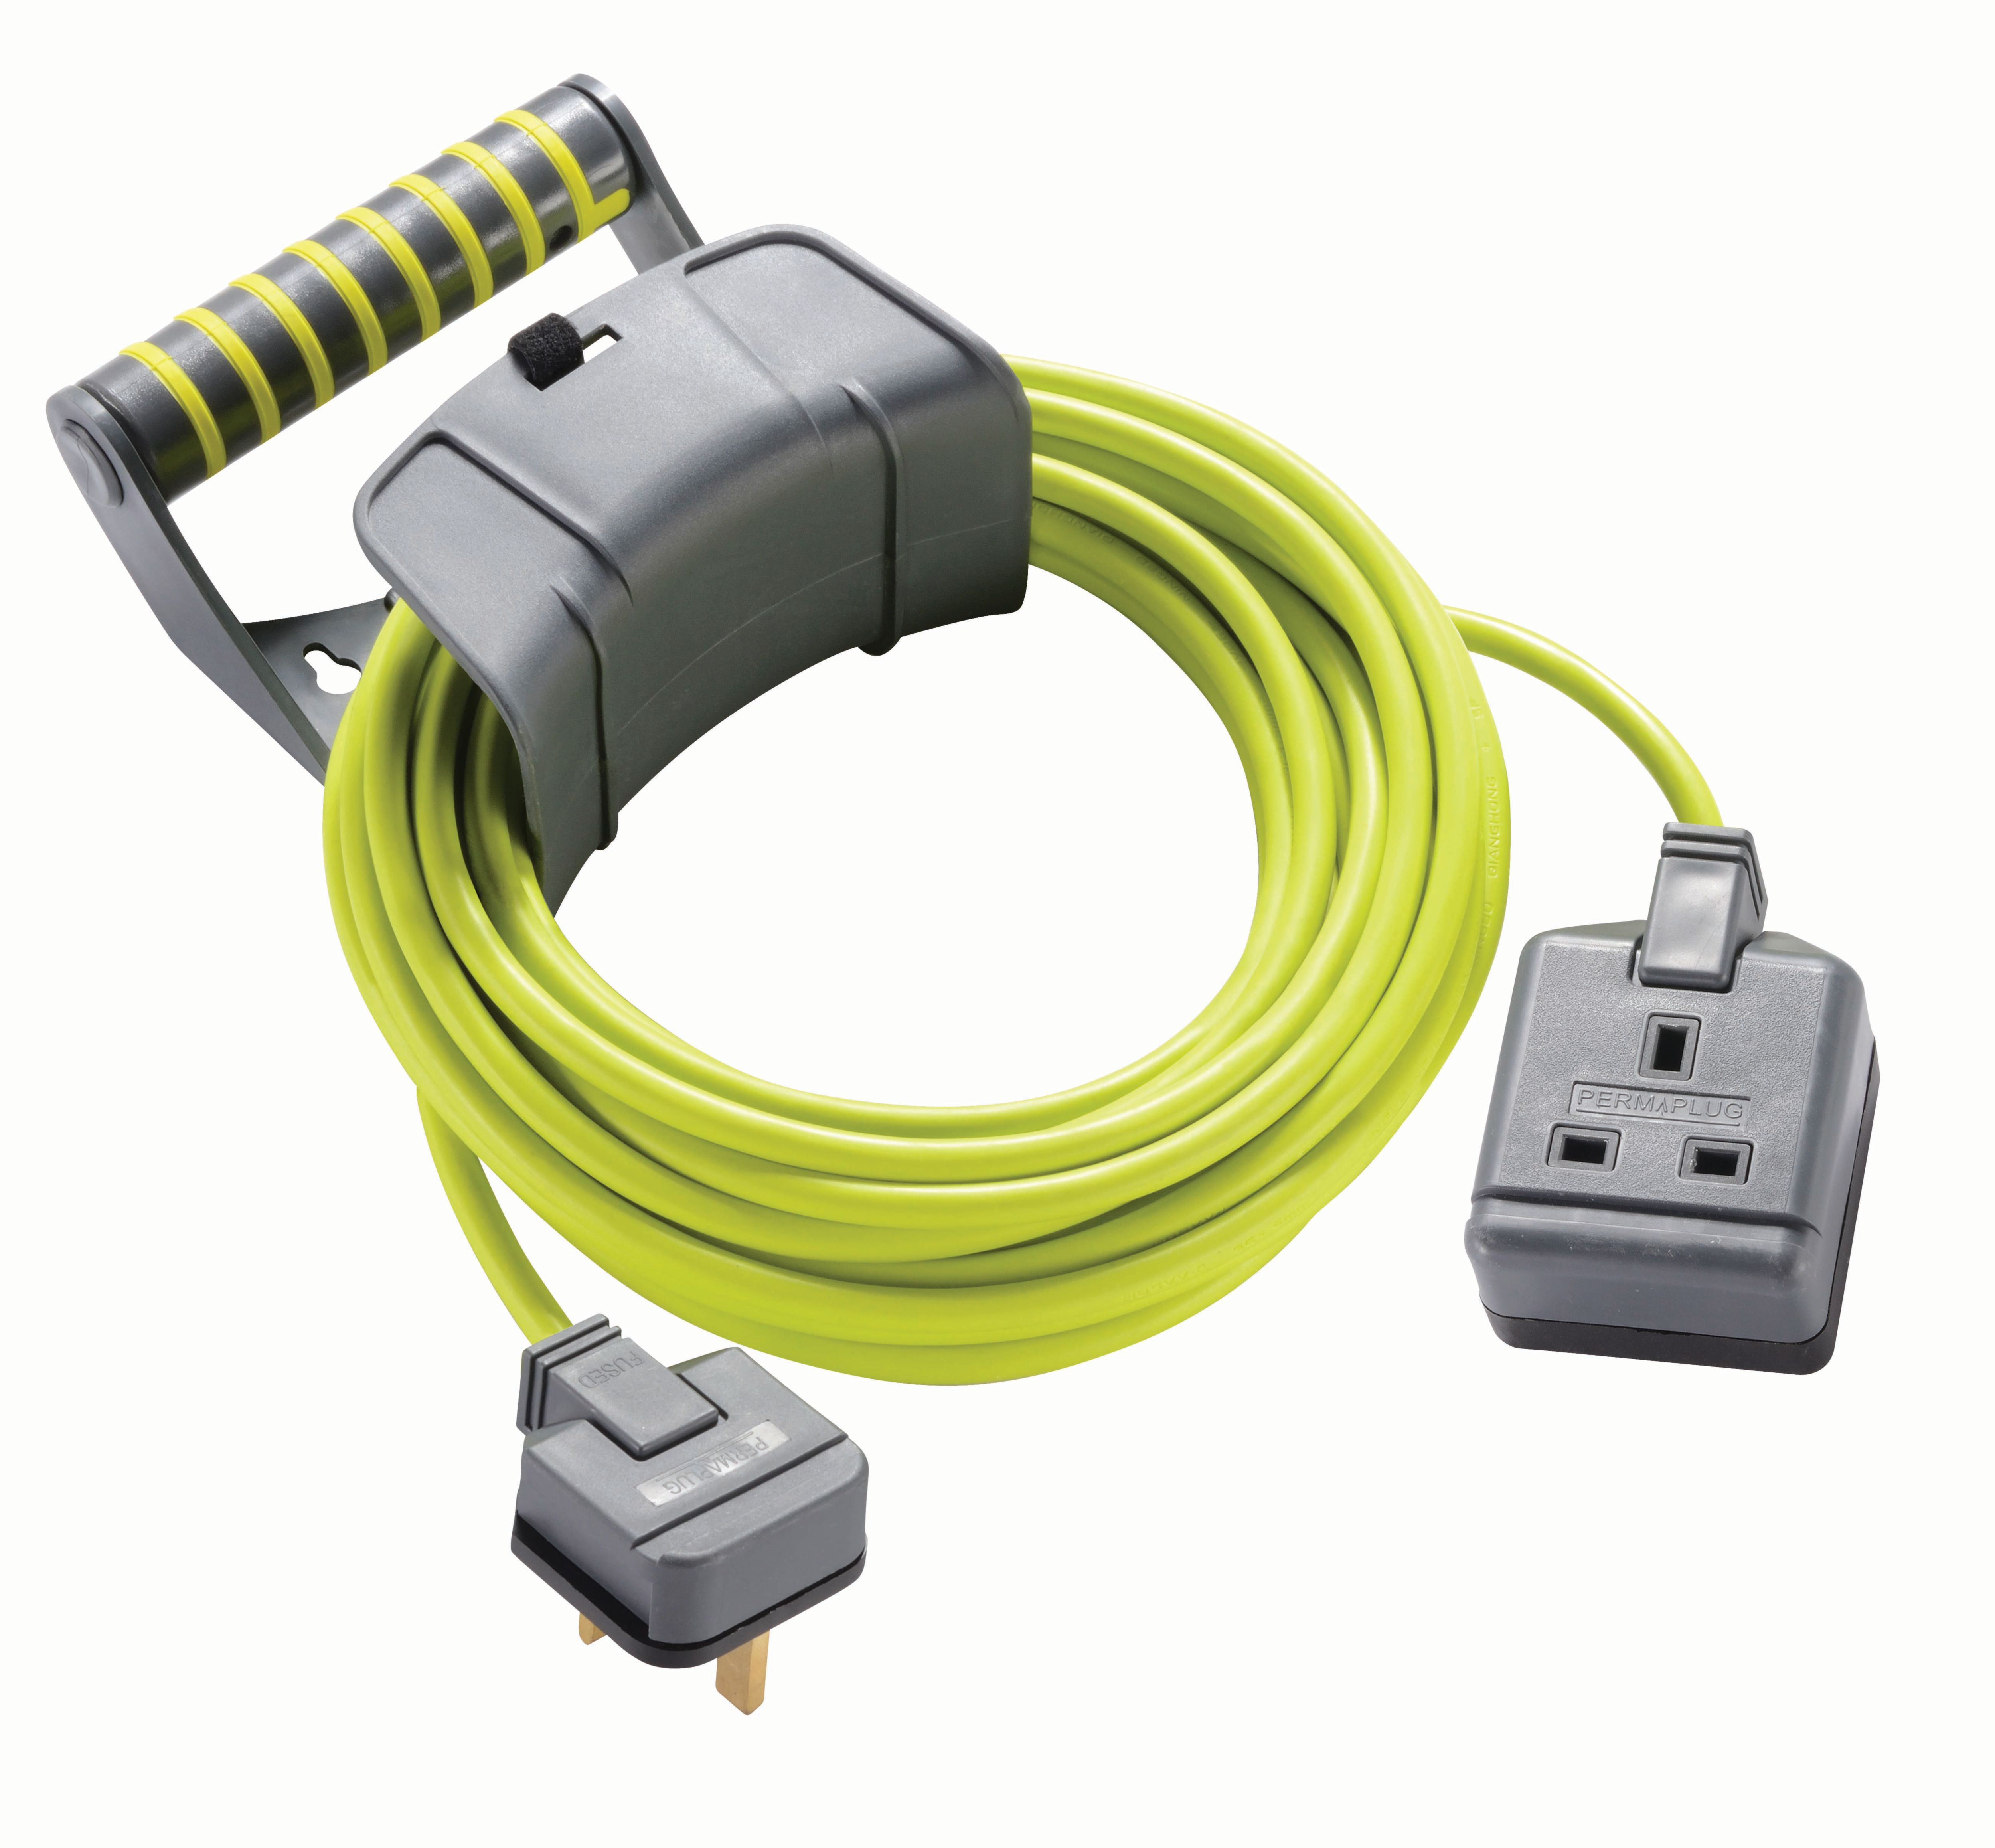 Image of Masterplug Pro-XT Single Trailing Socket High Visibility Cable - 10m 13A